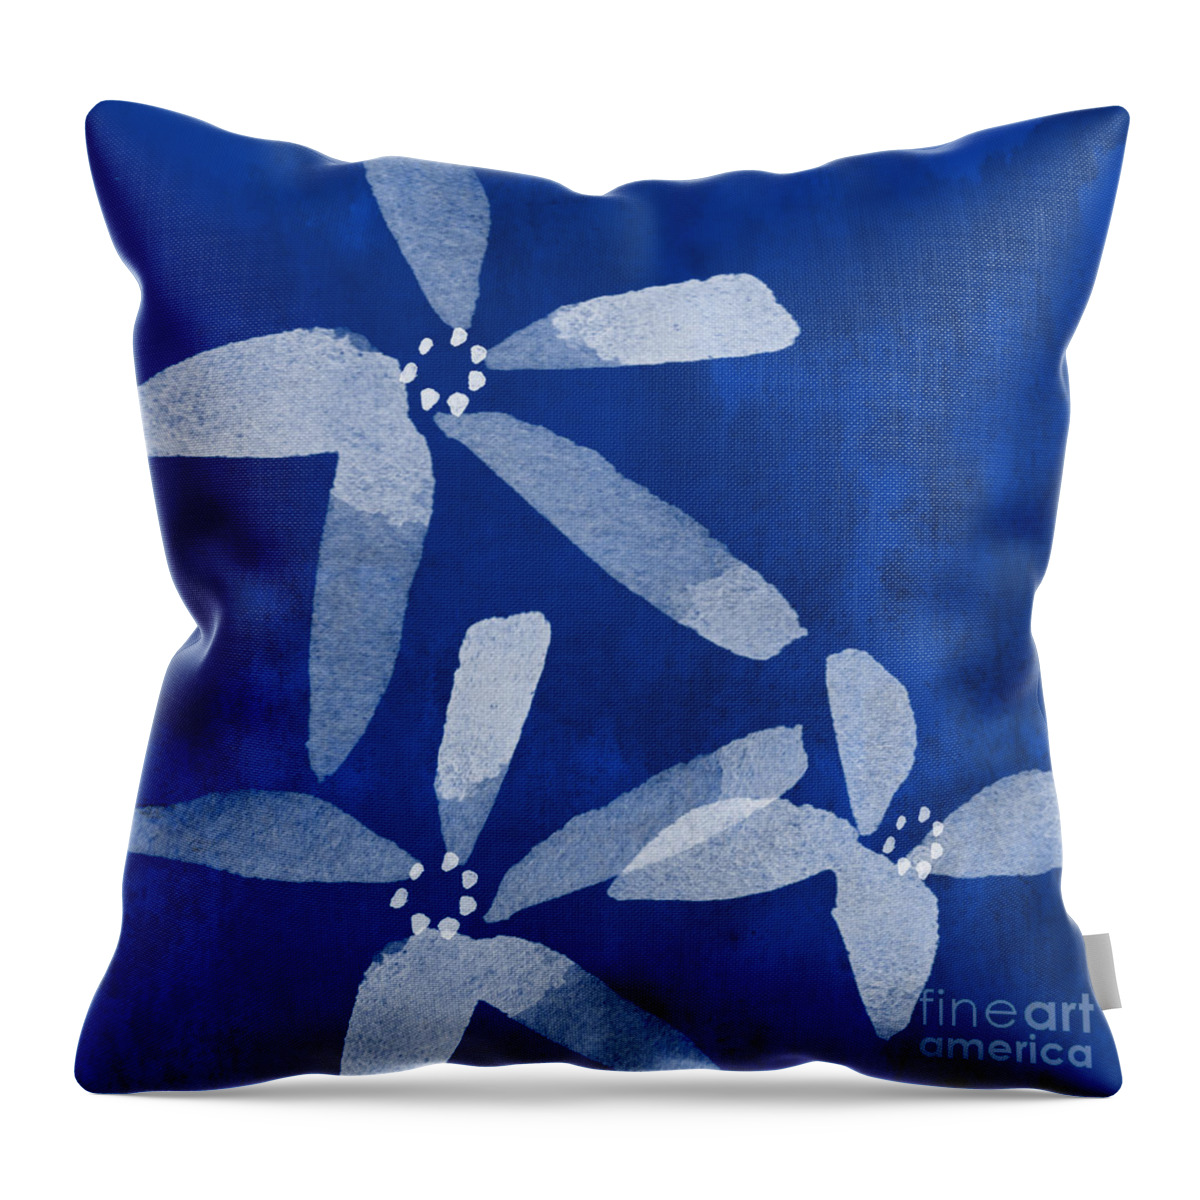 Abstract Throw Pillow featuring the painting Indigo Flowers by Linda Woods